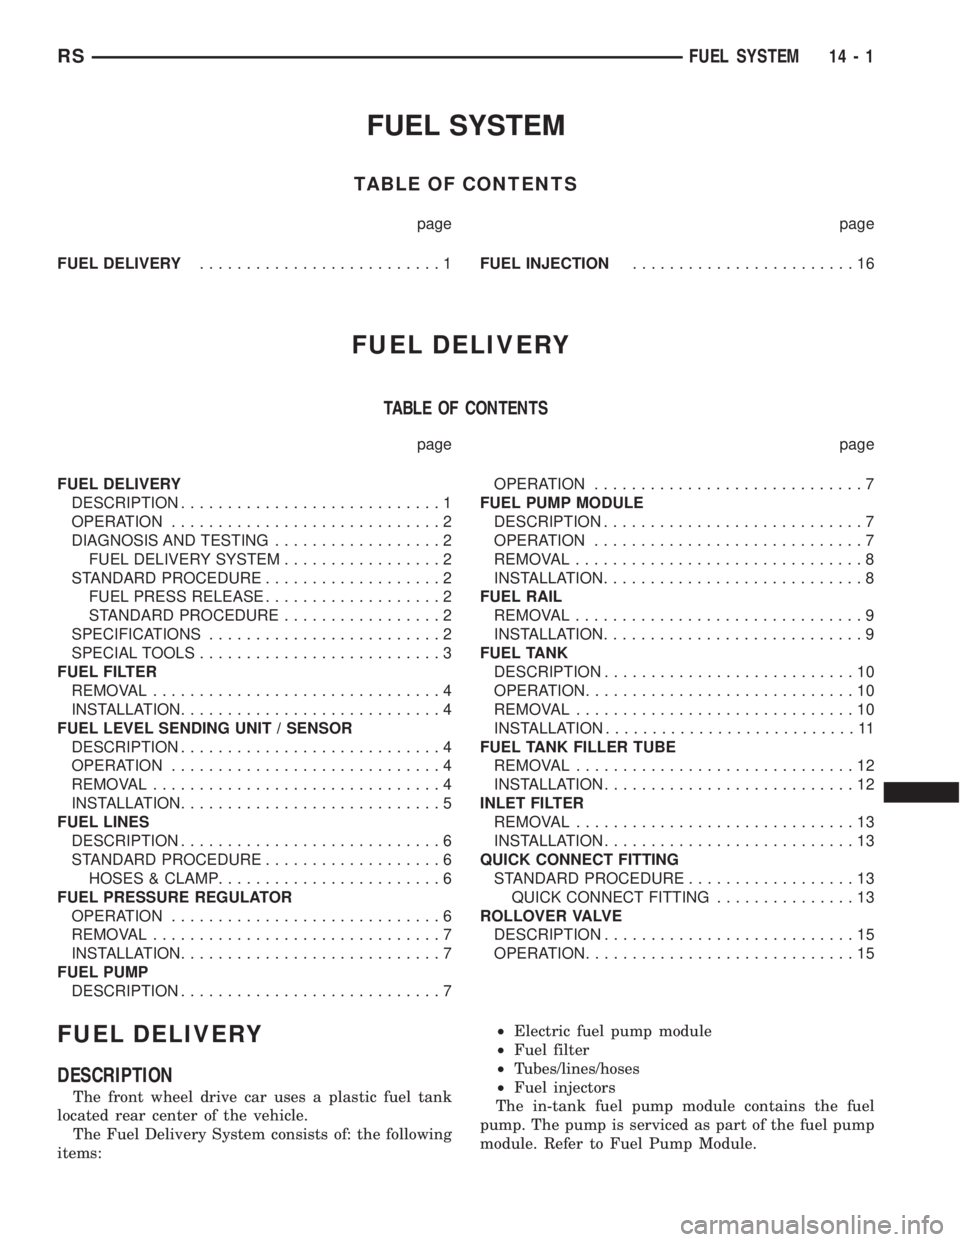 CHRYSLER VOYAGER 2001  Service Manual FUEL SYSTEM
TABLE OF CONTENTS
page page
FUEL DELIVERY..........................1FUEL INJECTION........................16
FUEL DELIVERY
TABLE OF CONTENTS
page page
FUEL DELIVERY
DESCRIPTION............